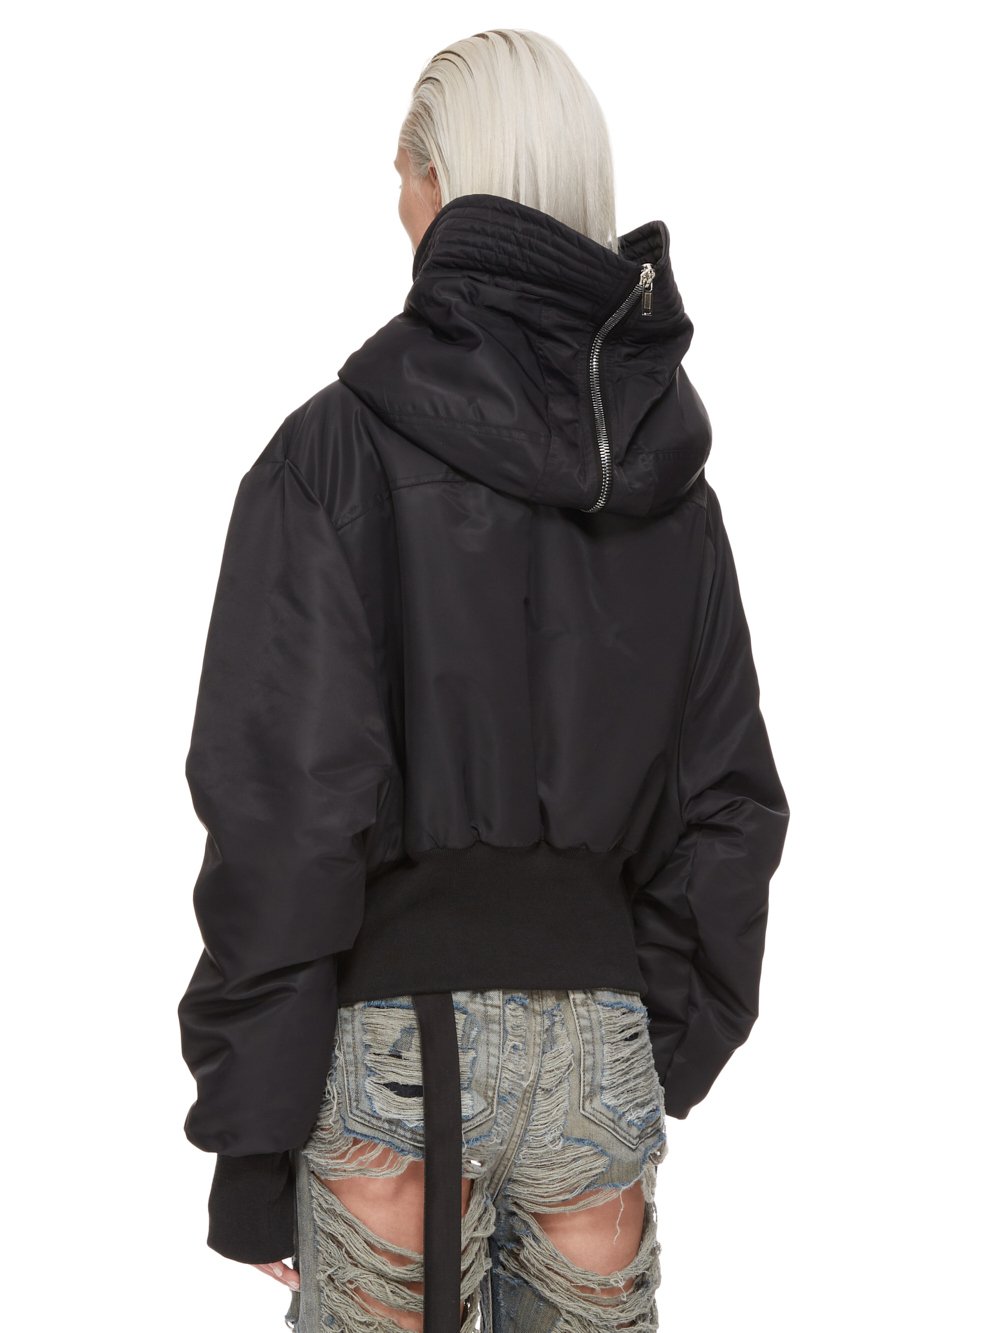 DRKSHDW FW23 LUXOR ALICE PARKA IN BLACK AND PALE GREEN RECYCLED BOMBER